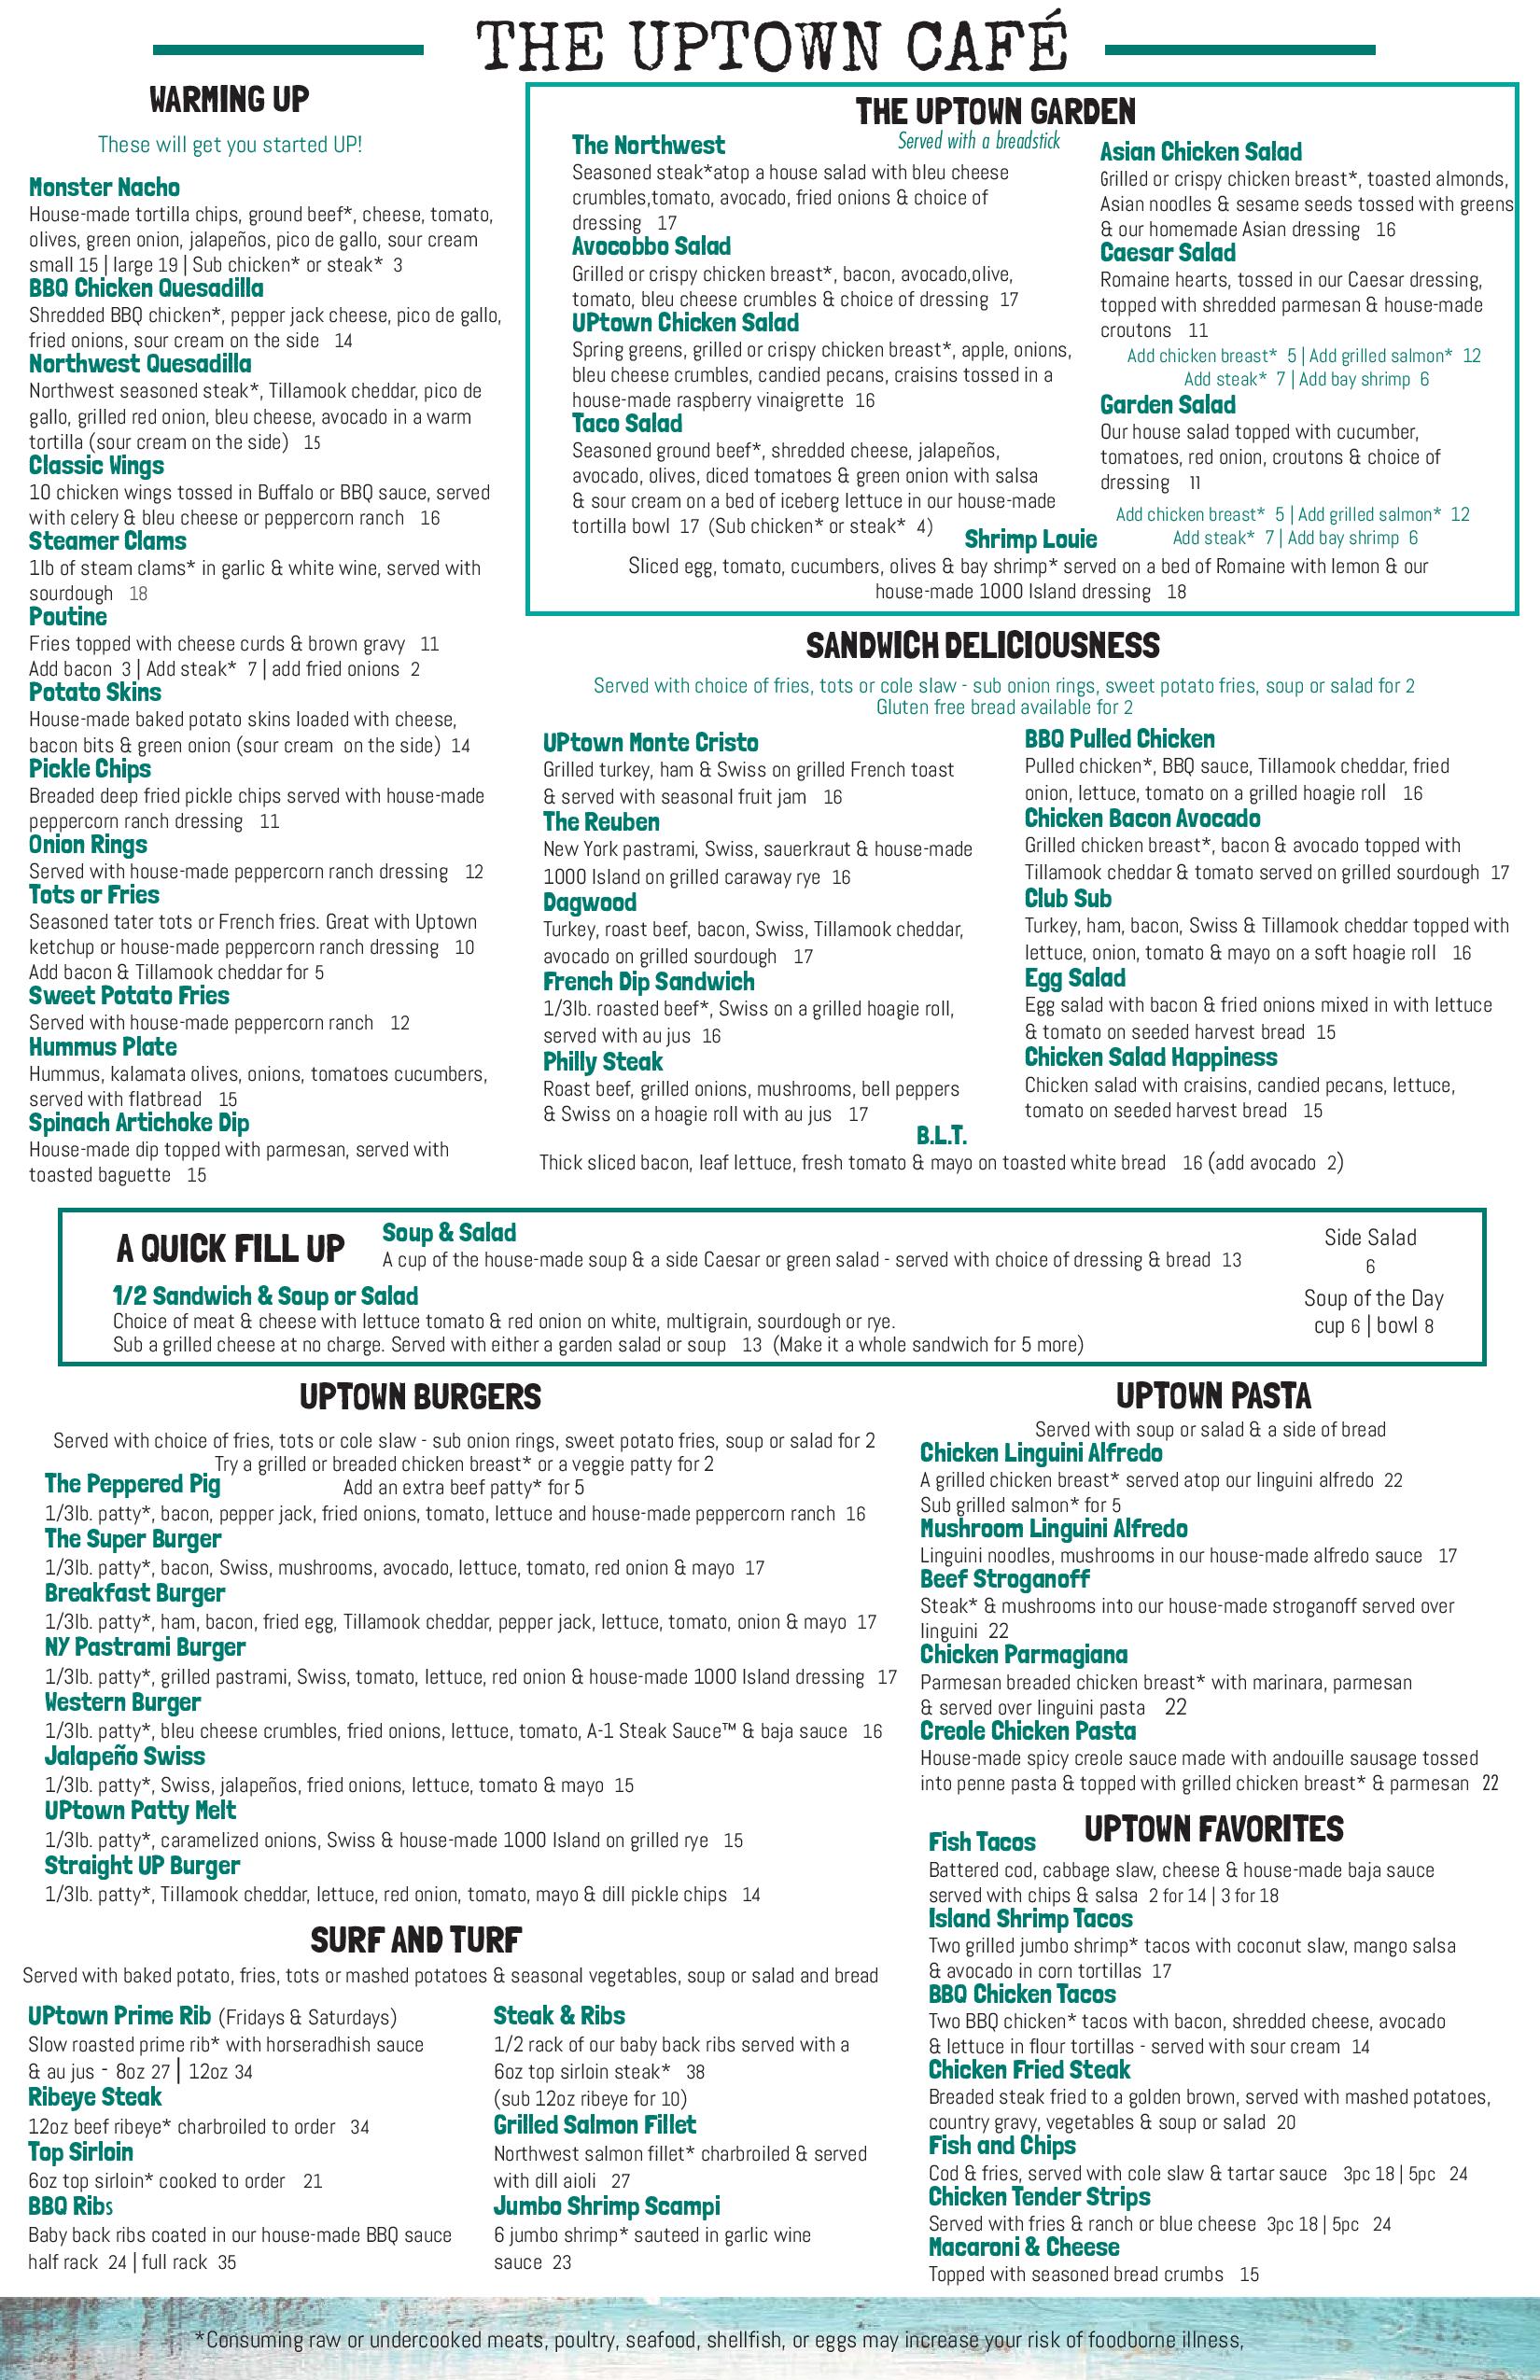 The Uptown Cafe Menu Page 2